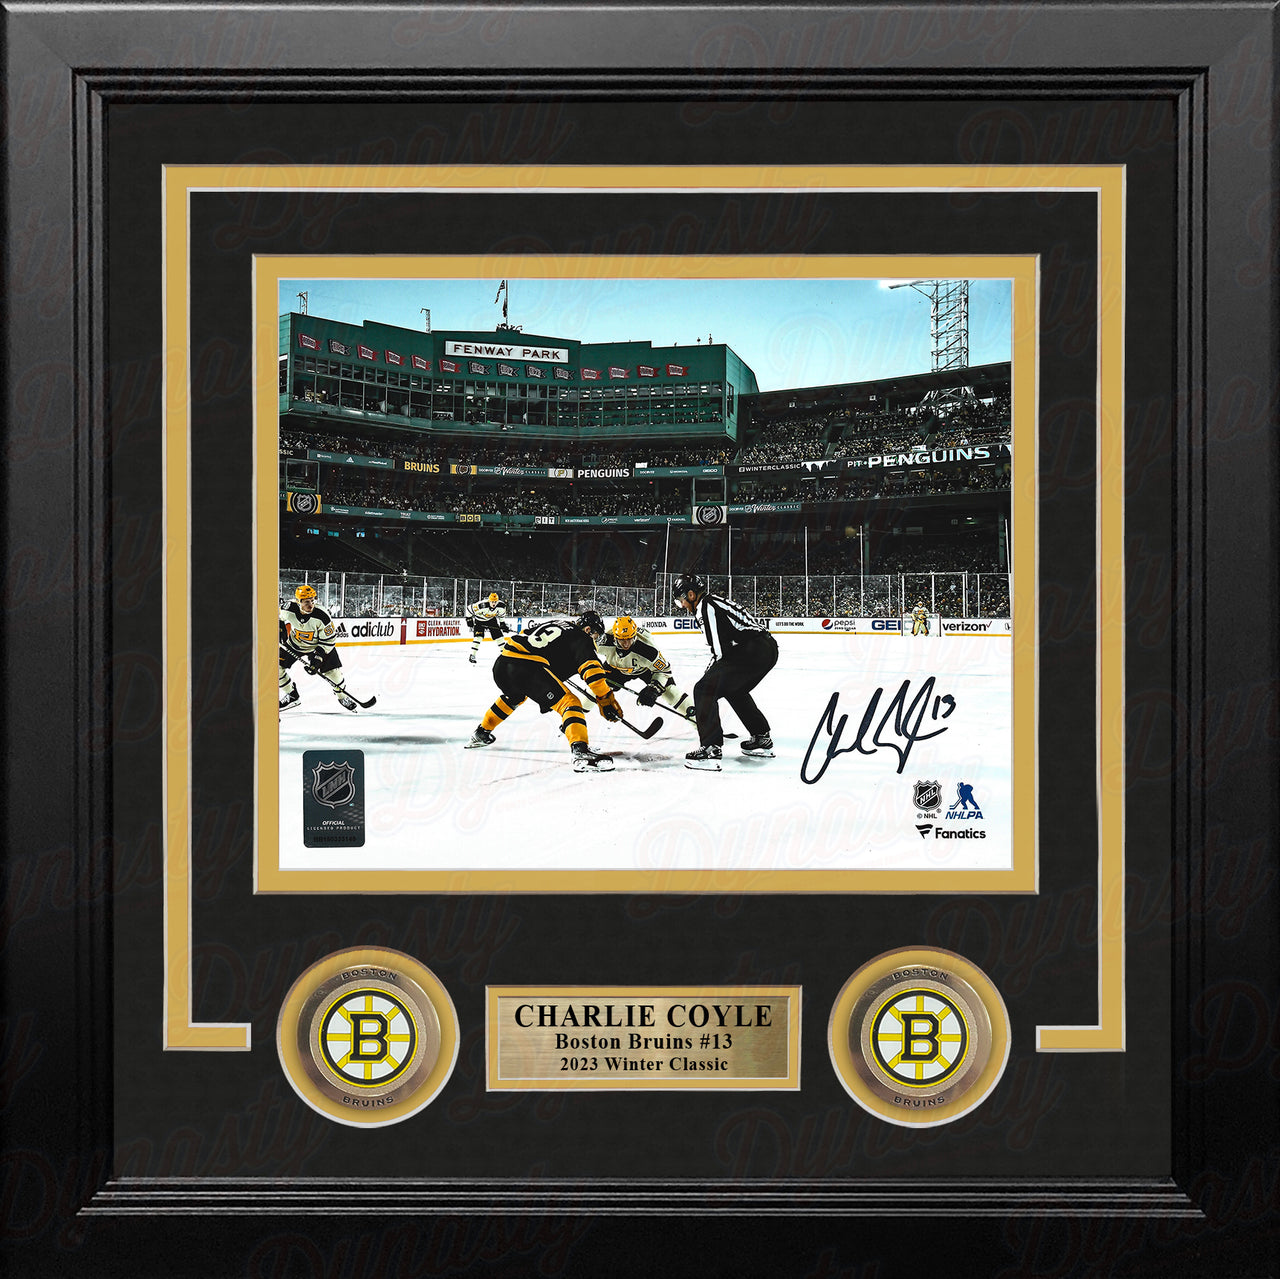 Charlie Coyle 2023 Winter Classic Boston Bruins Autographed 8" x 10" Framed Hockey Photo - Dynasty Sports & Framing 